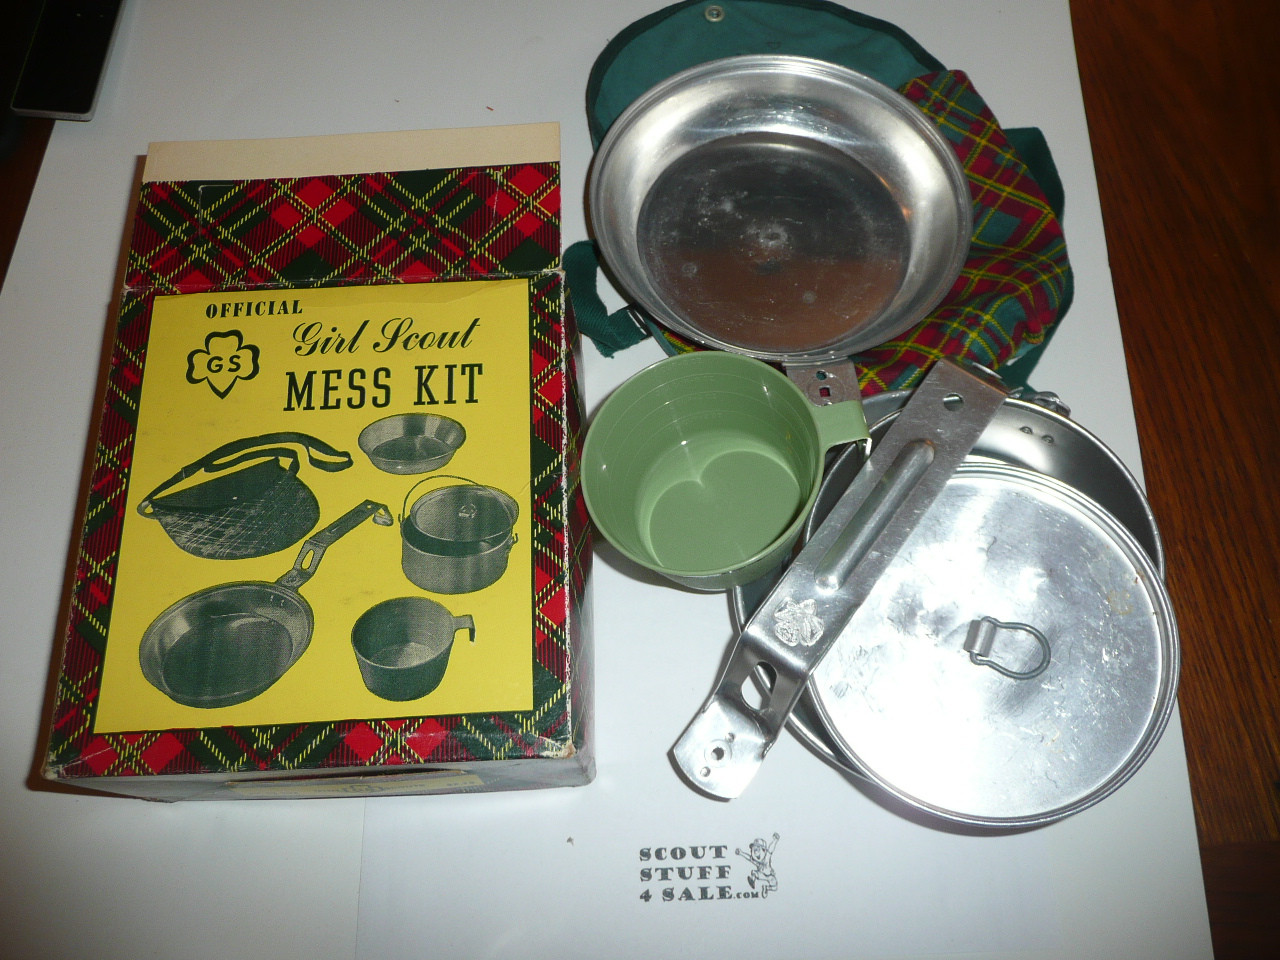 1960's Official Girl Scout Mess Kit, Near MINT condition but missing screw to hold together, in Original Box